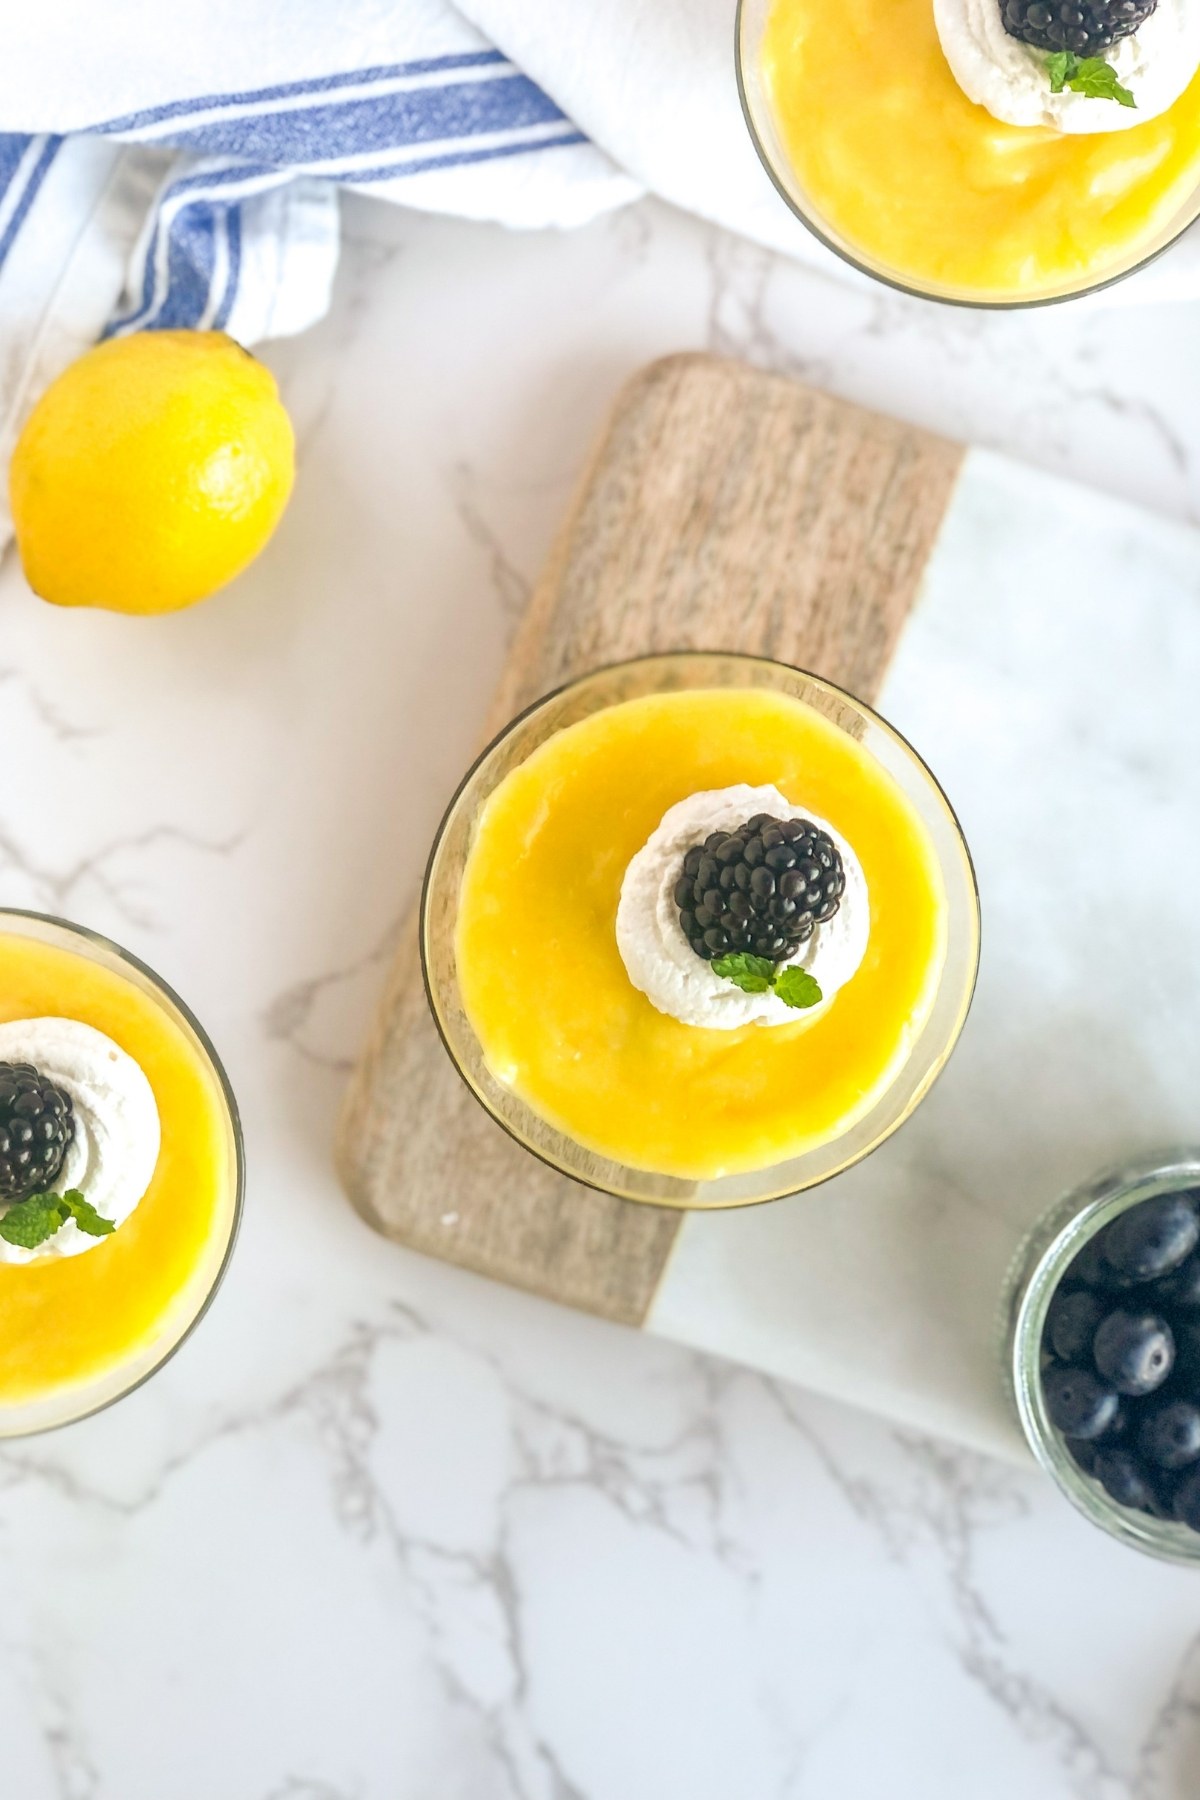 lemon parfaits with whipped cream and blackberries